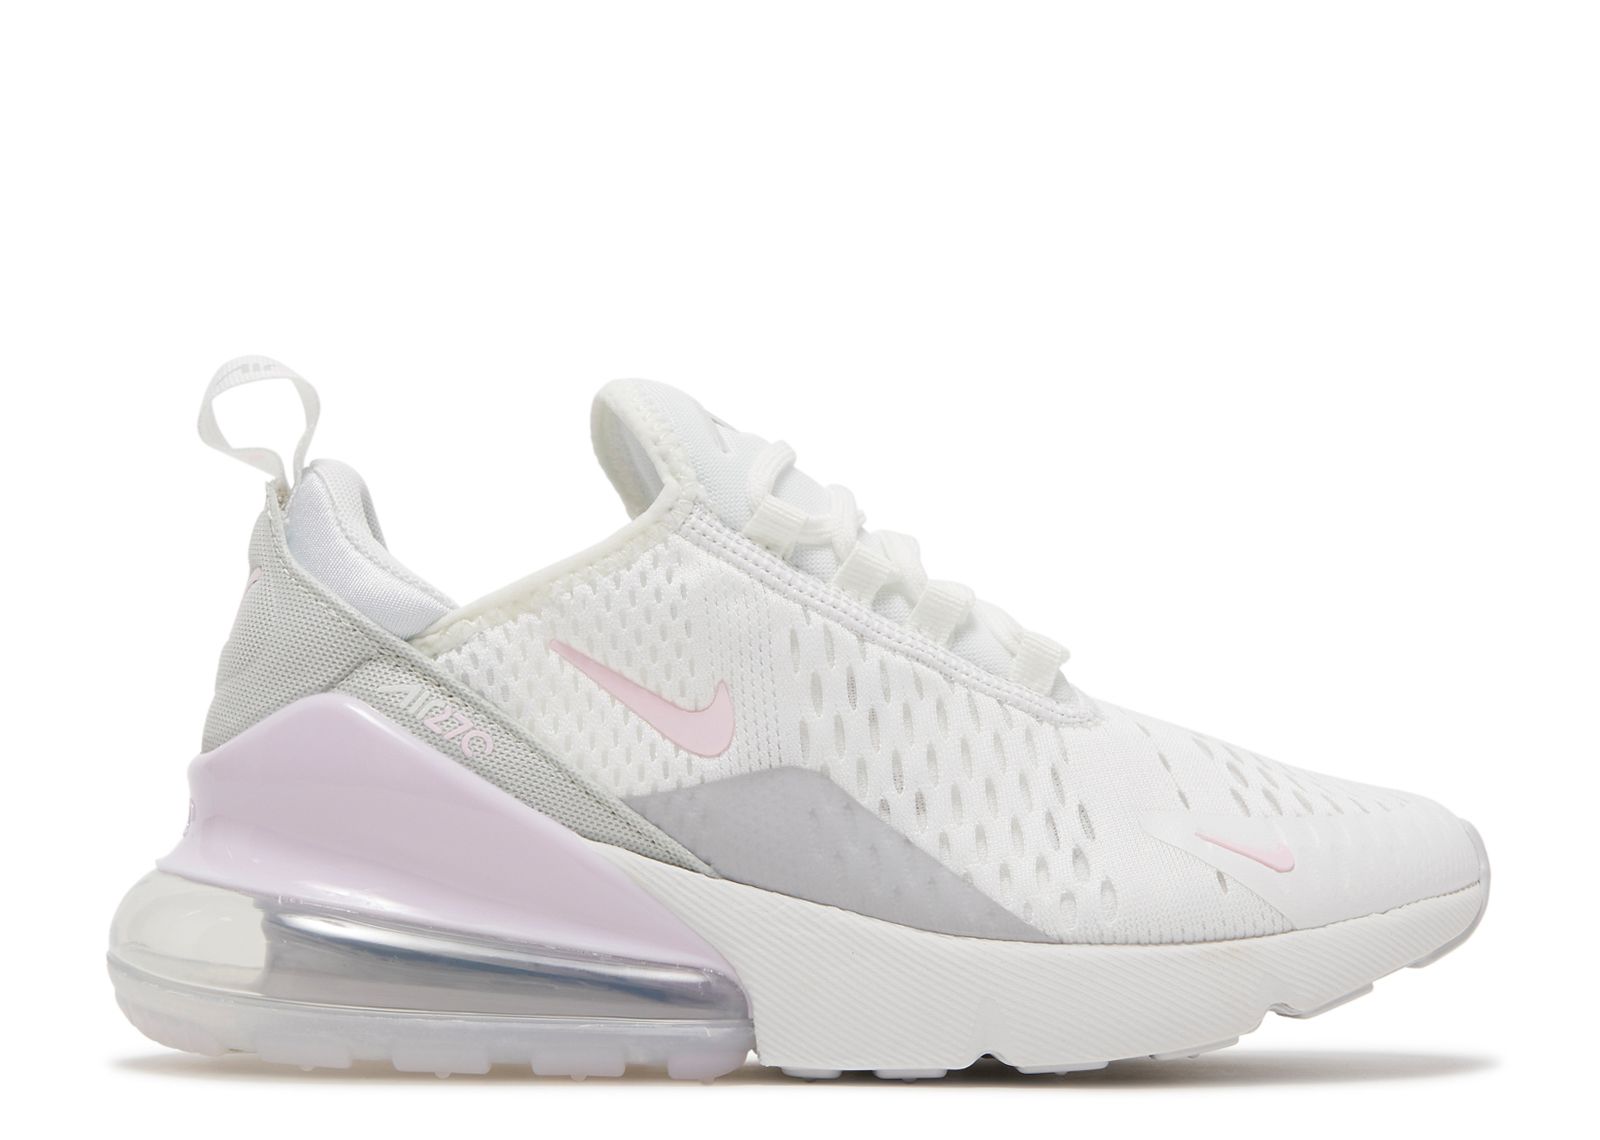 Кроссовки Nike Wmns Air Max 270 'Summit White Regal Pink', белый кроссовки nike sportswear w air max 90 futura summit white soft pink barely rose pink oxford white